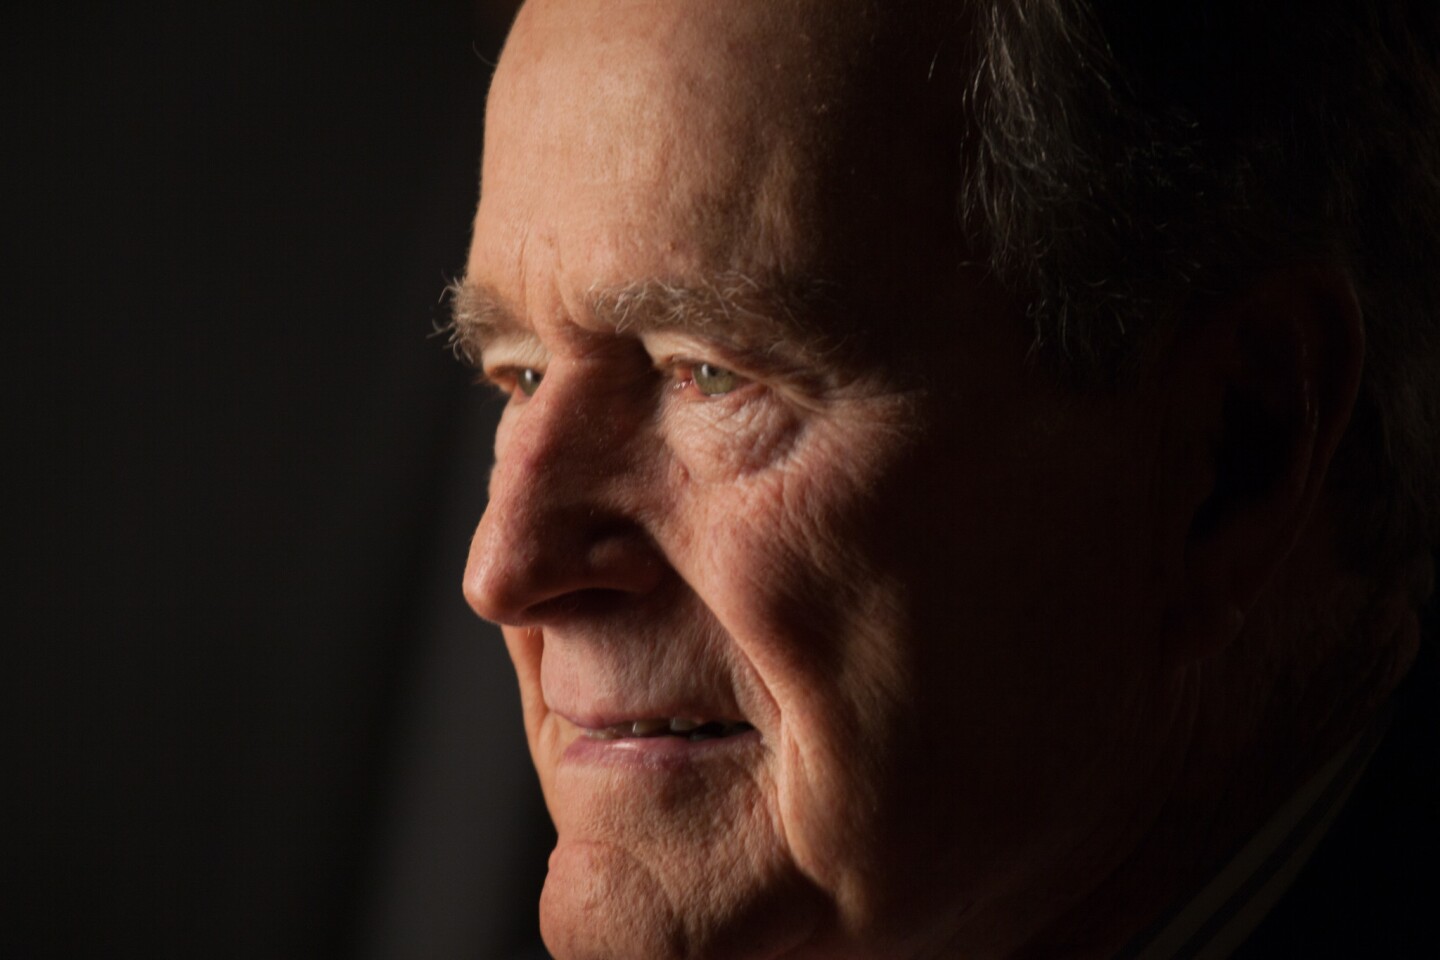 Former President George H.W. Bush is interviewed for "The Presidents' Gatekeepers" project about White House chiefs of staff at the Bush Library on Oct. 24, 2011, in College Station, Texas.